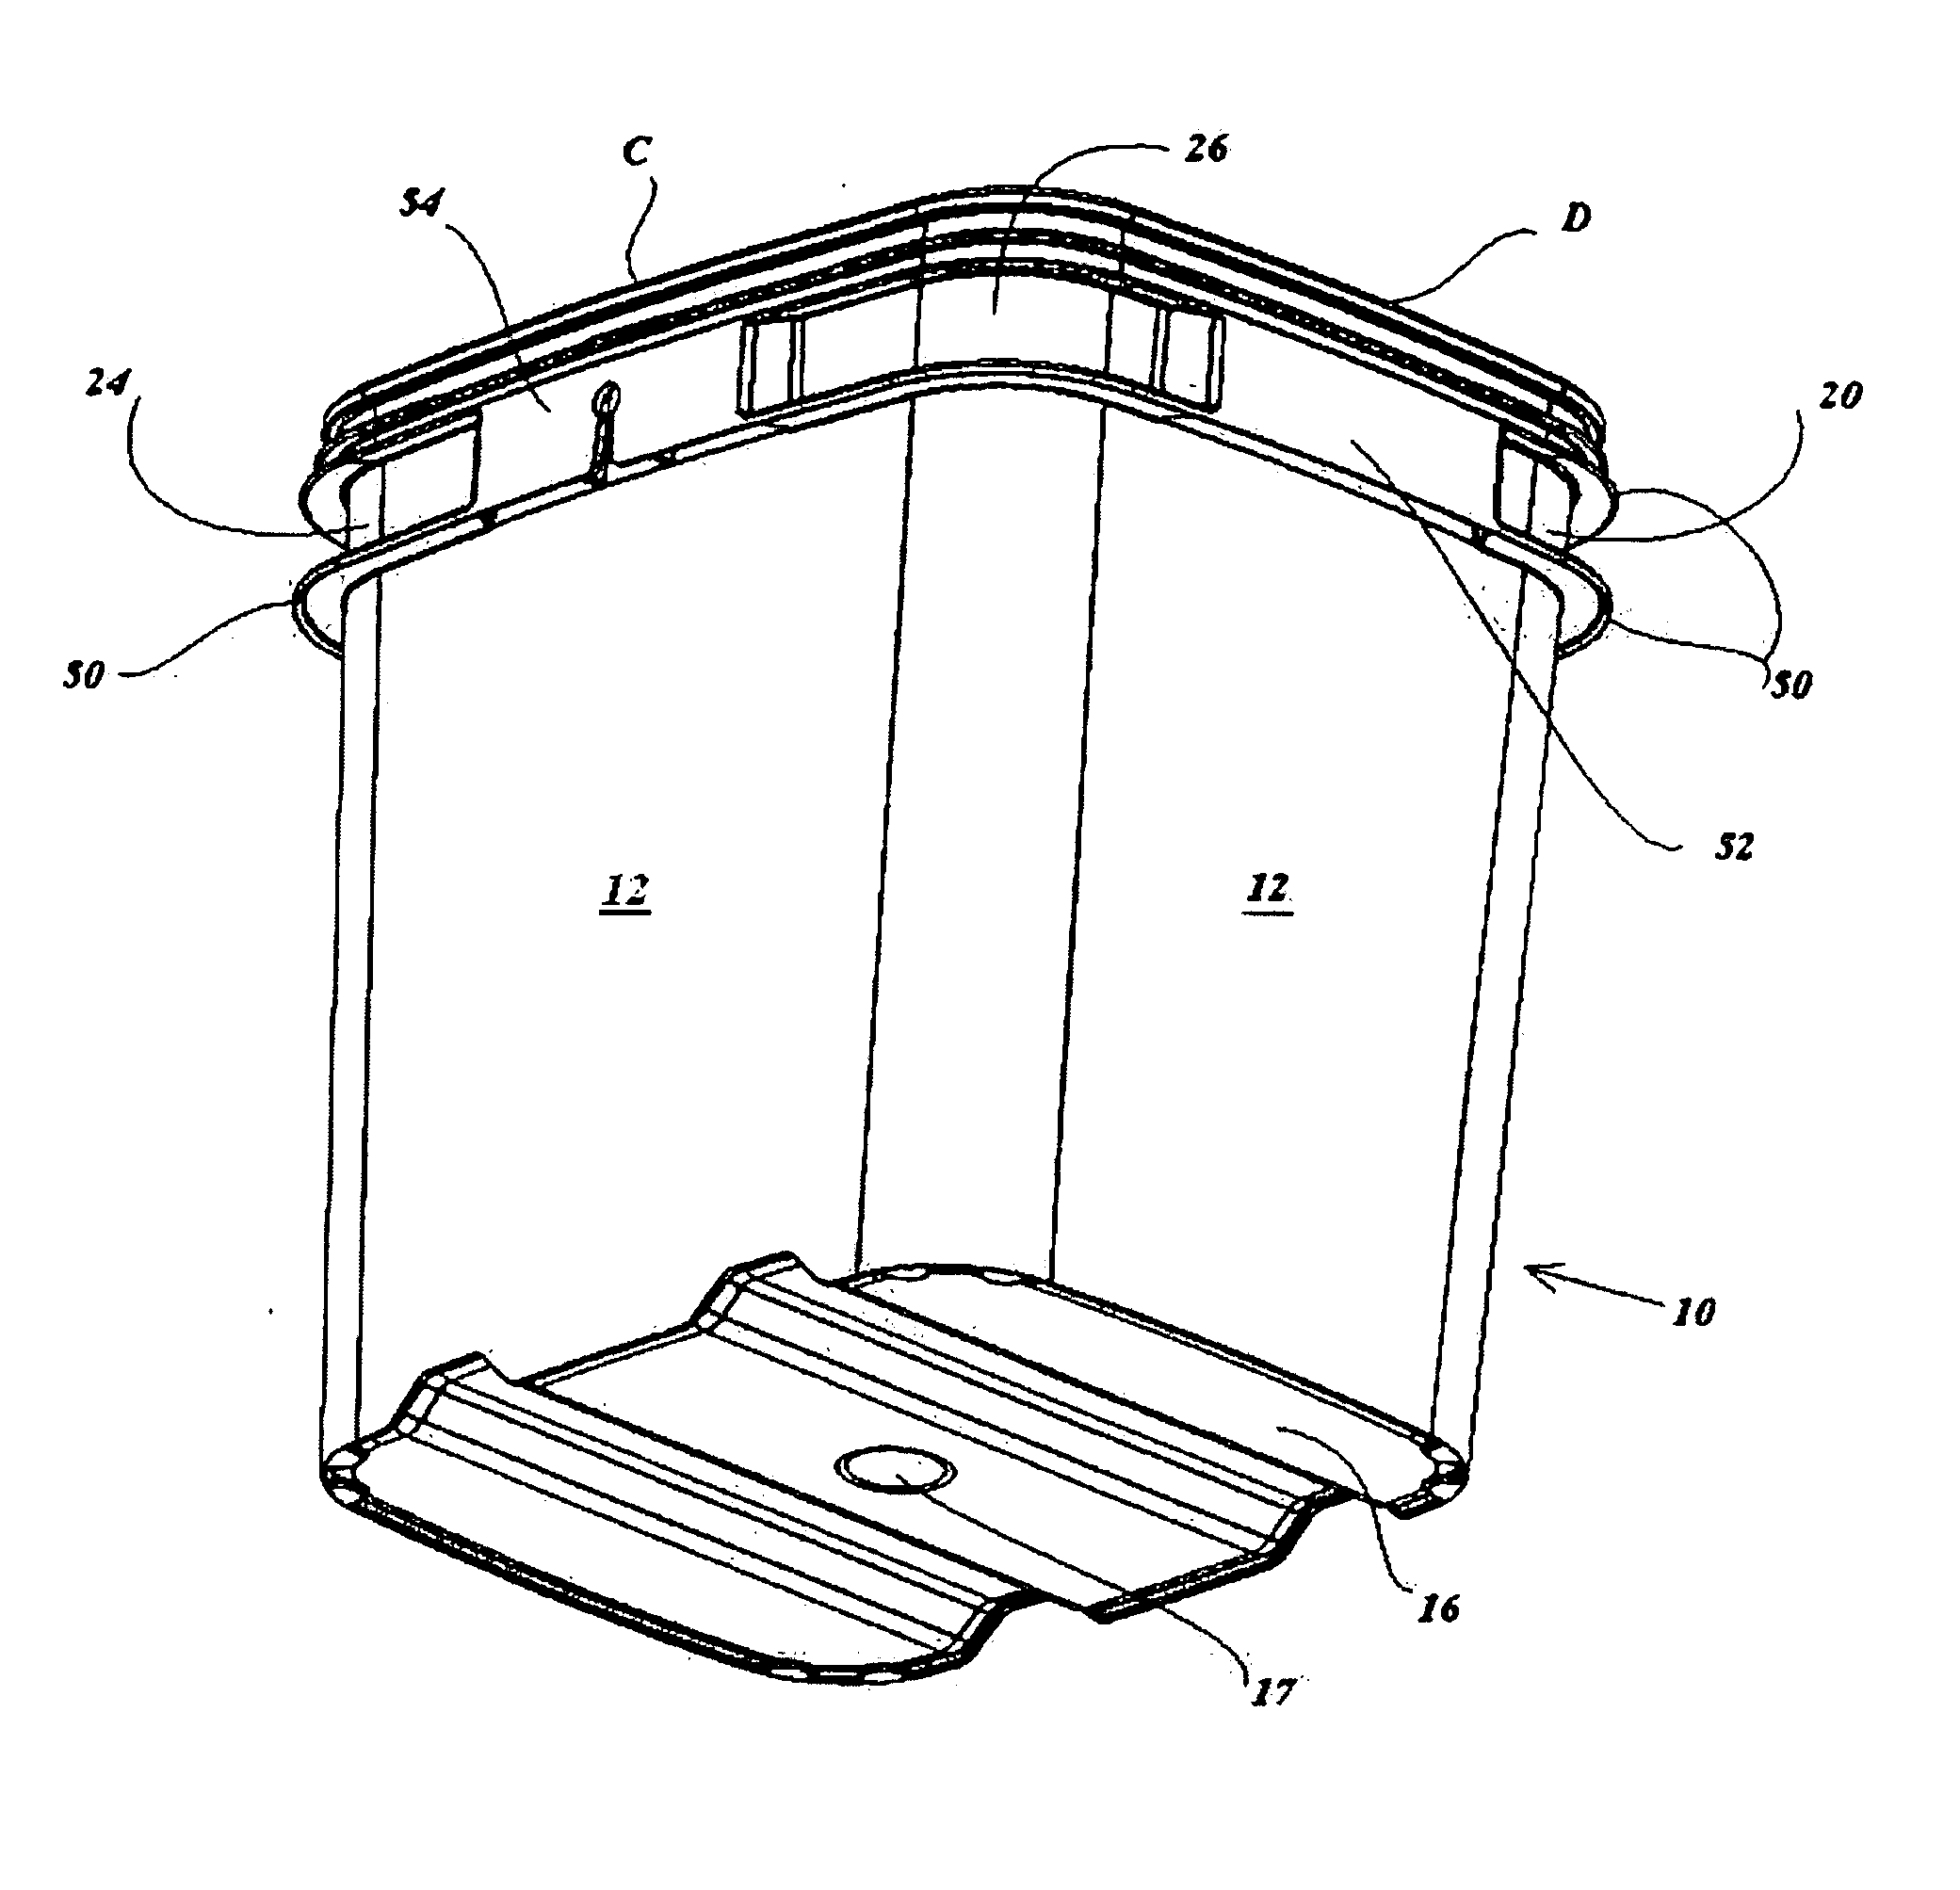 Container apparatus and related methods